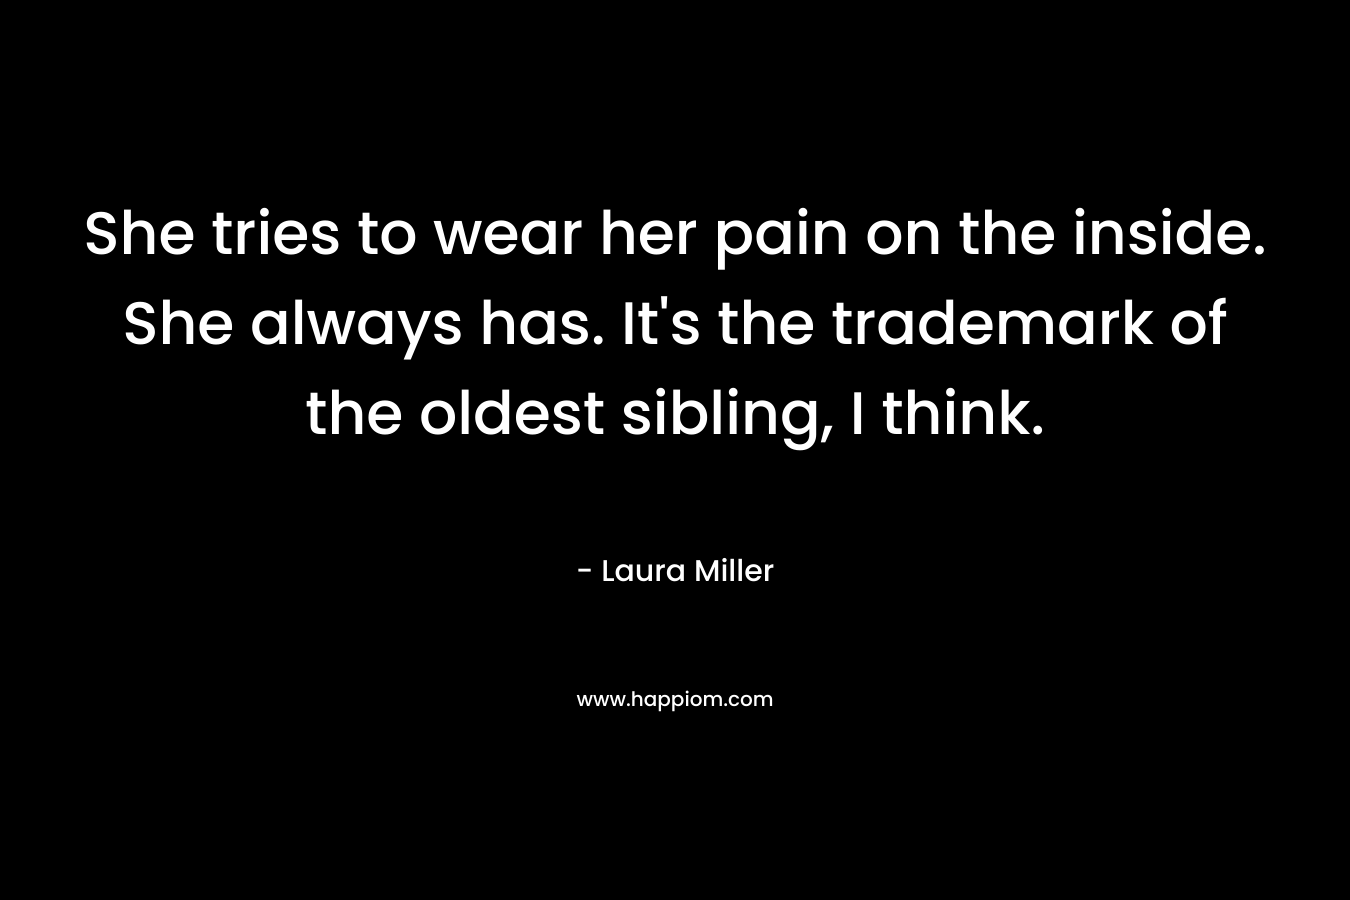 She tries to wear her pain on the inside. She always has. It's the trademark of the oldest sibling, I think.